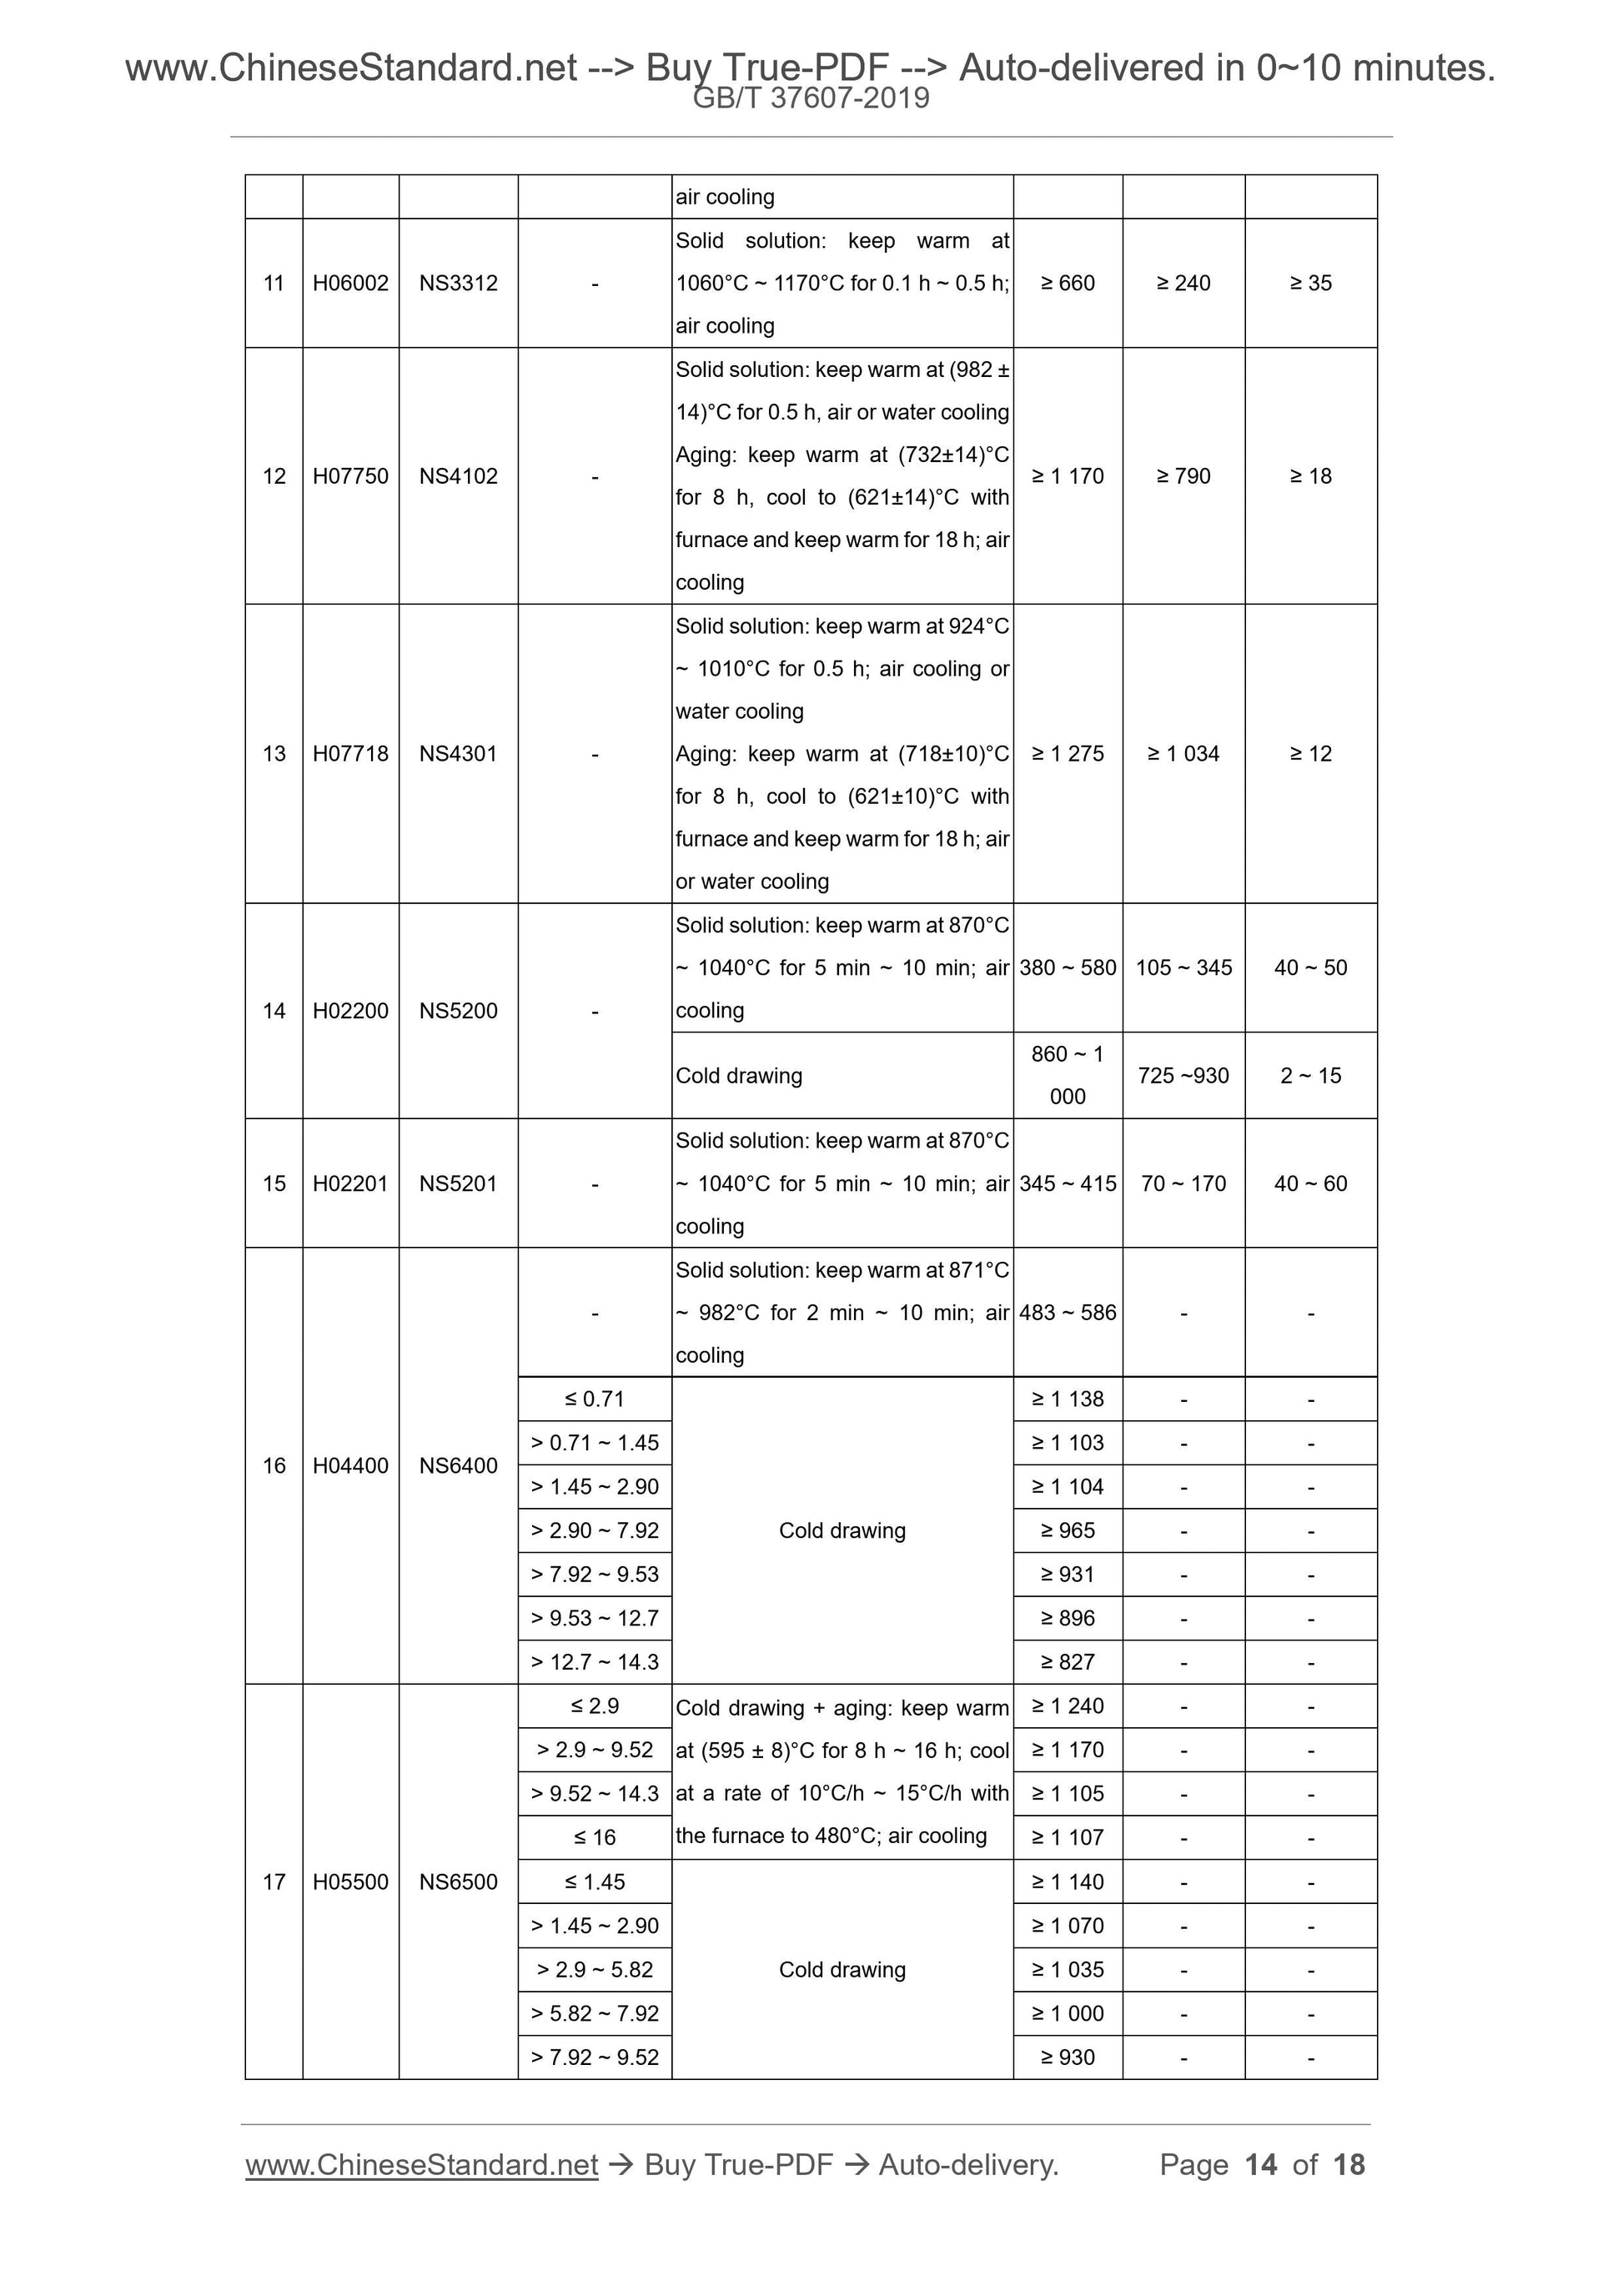 GB/T 37607-2019 Page 6